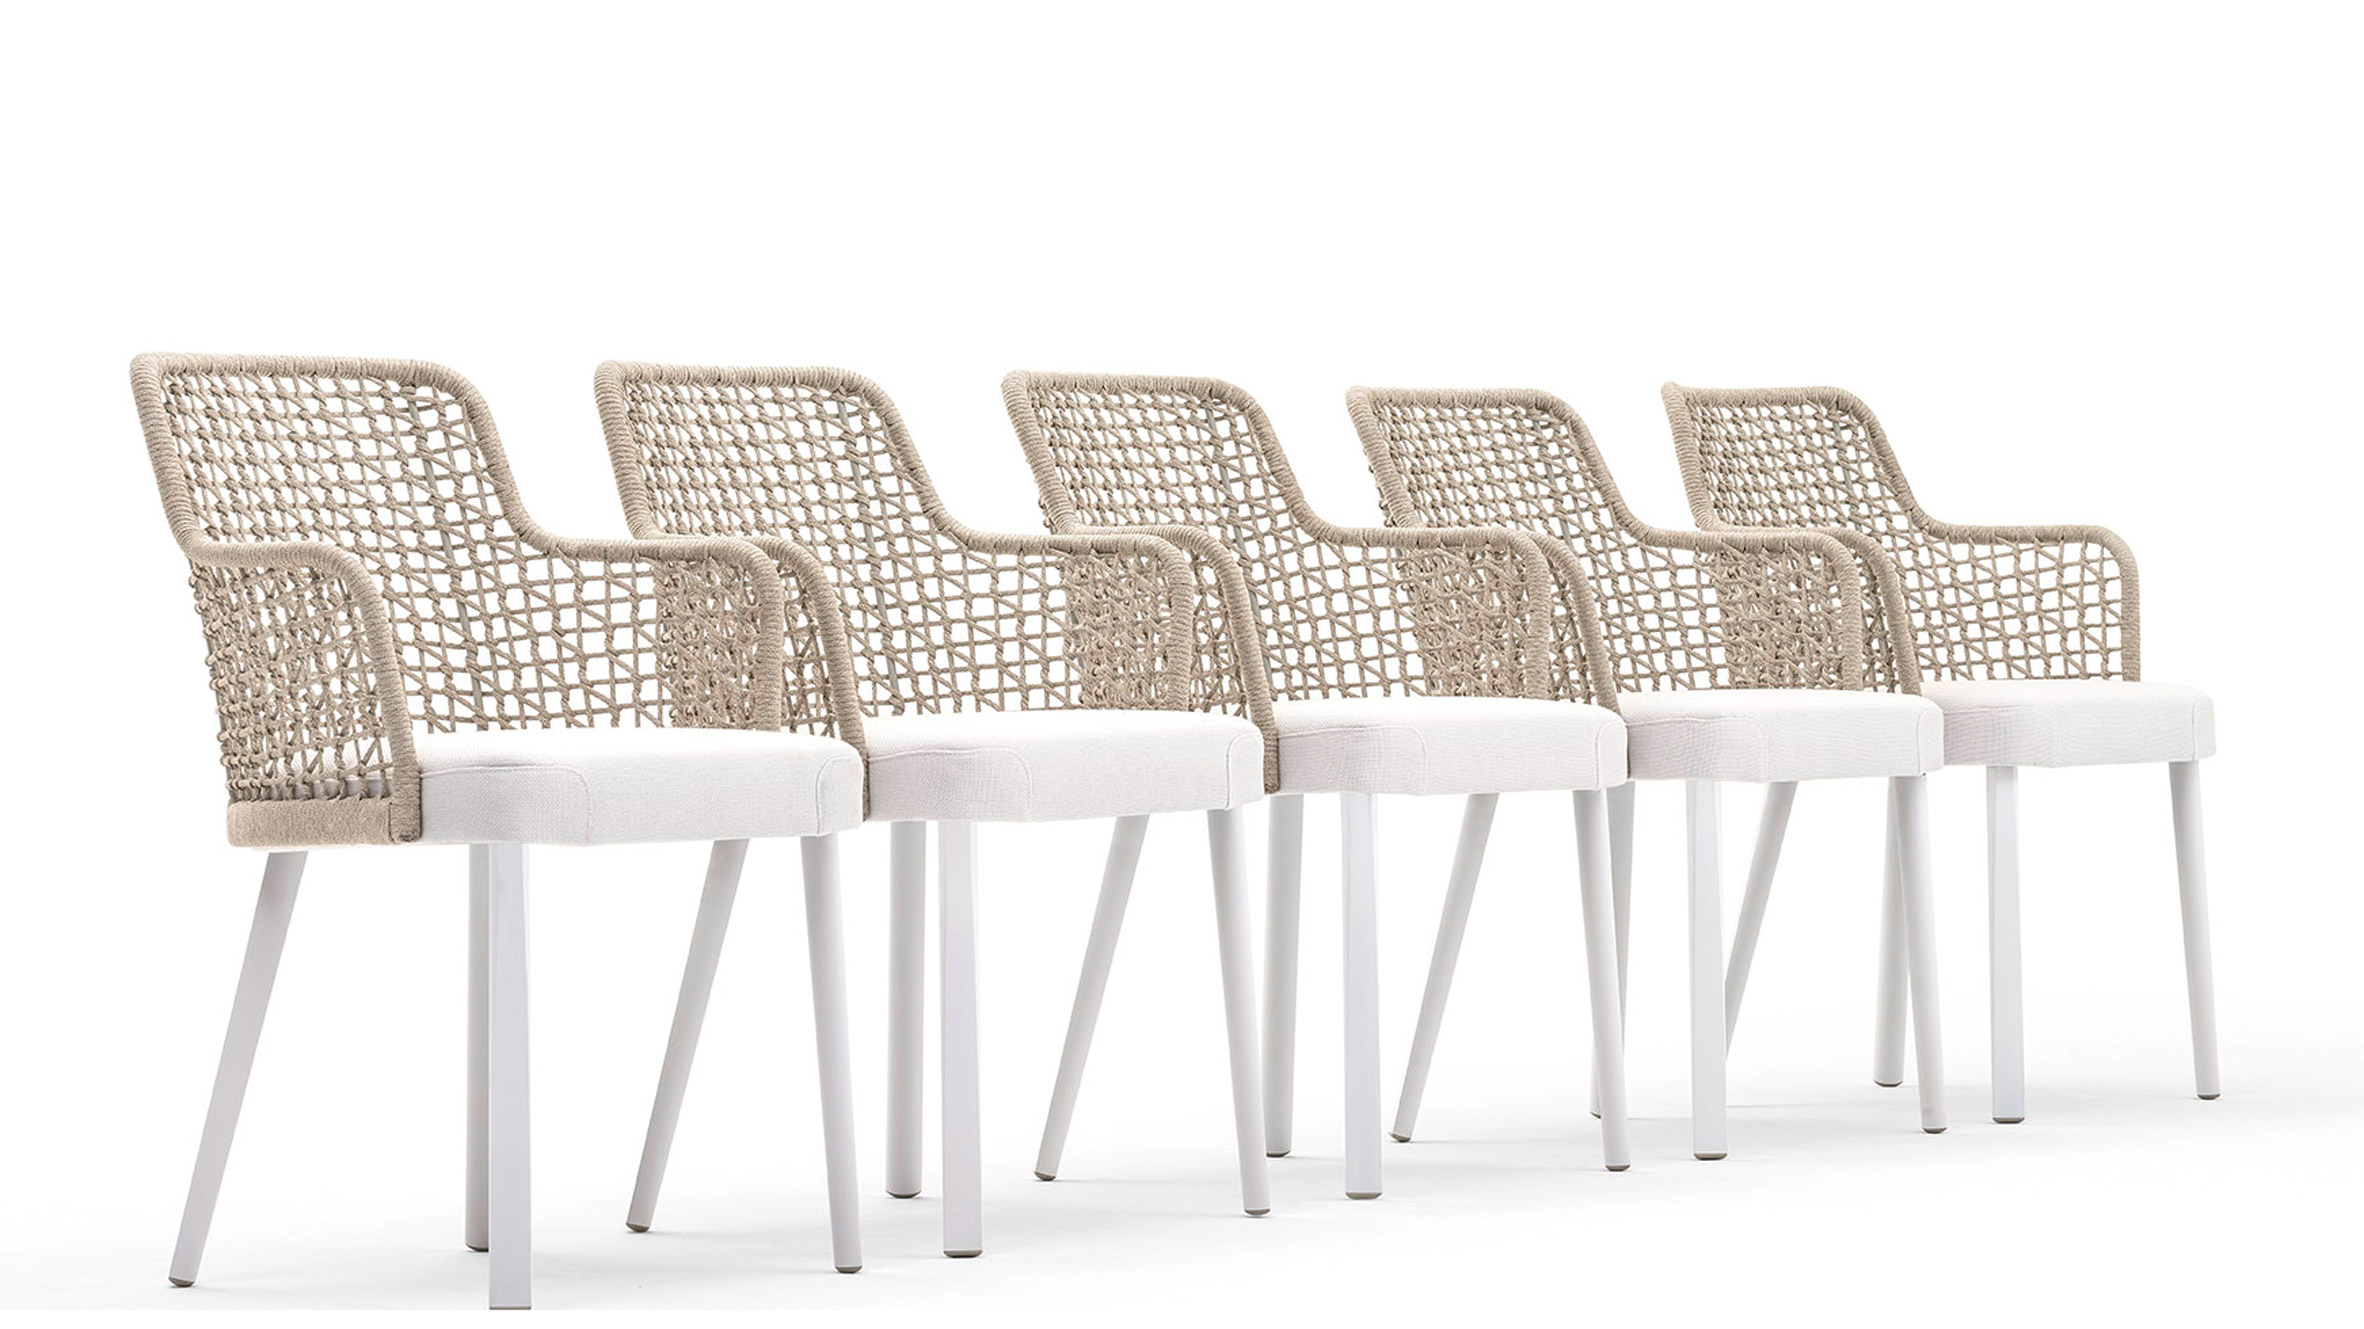 Monica Armani creates outdoor chair with woven backrest for Varaschin